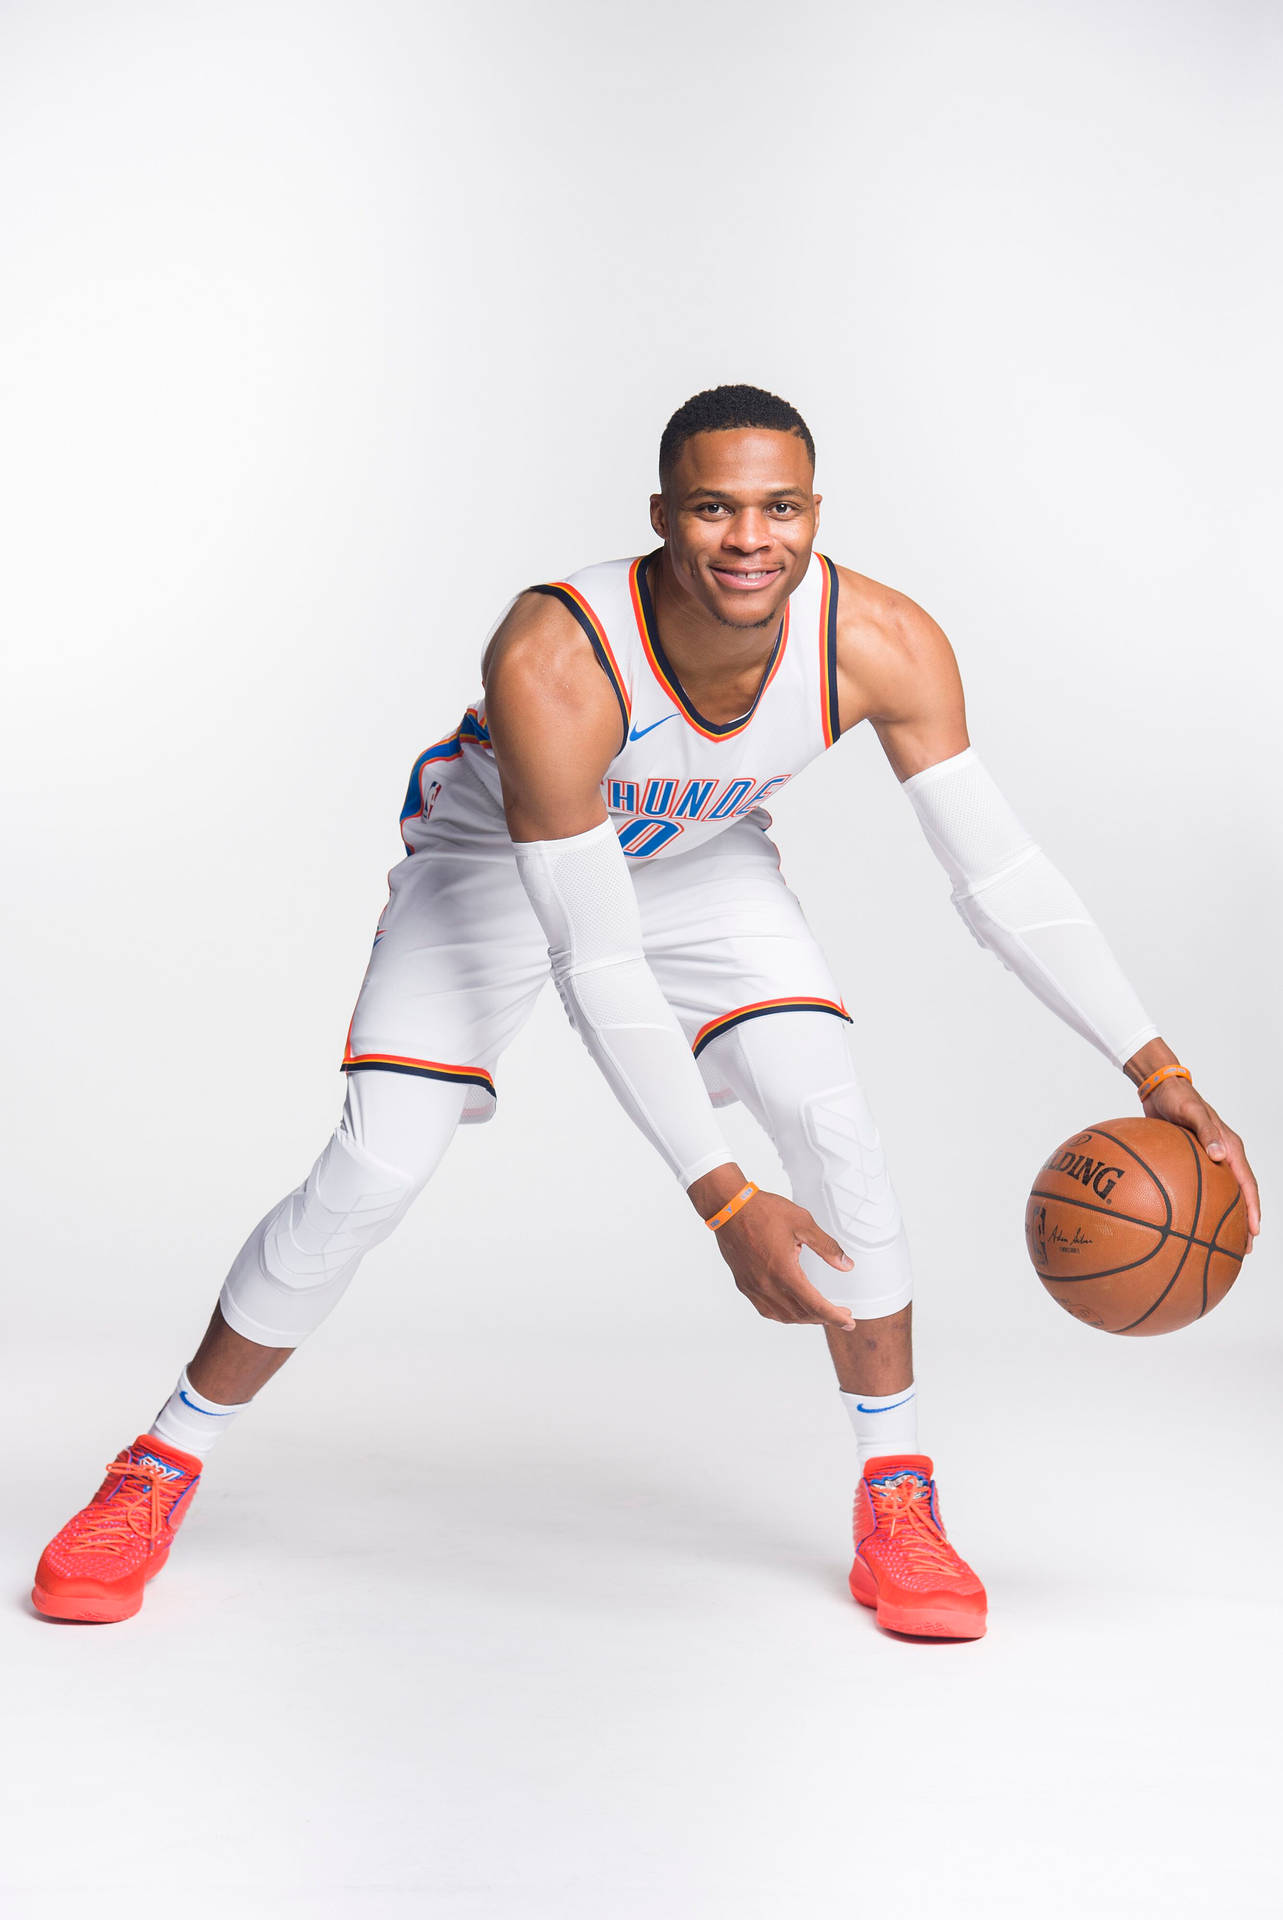 Russell Westbrook Dribbling Ball Portrait Background